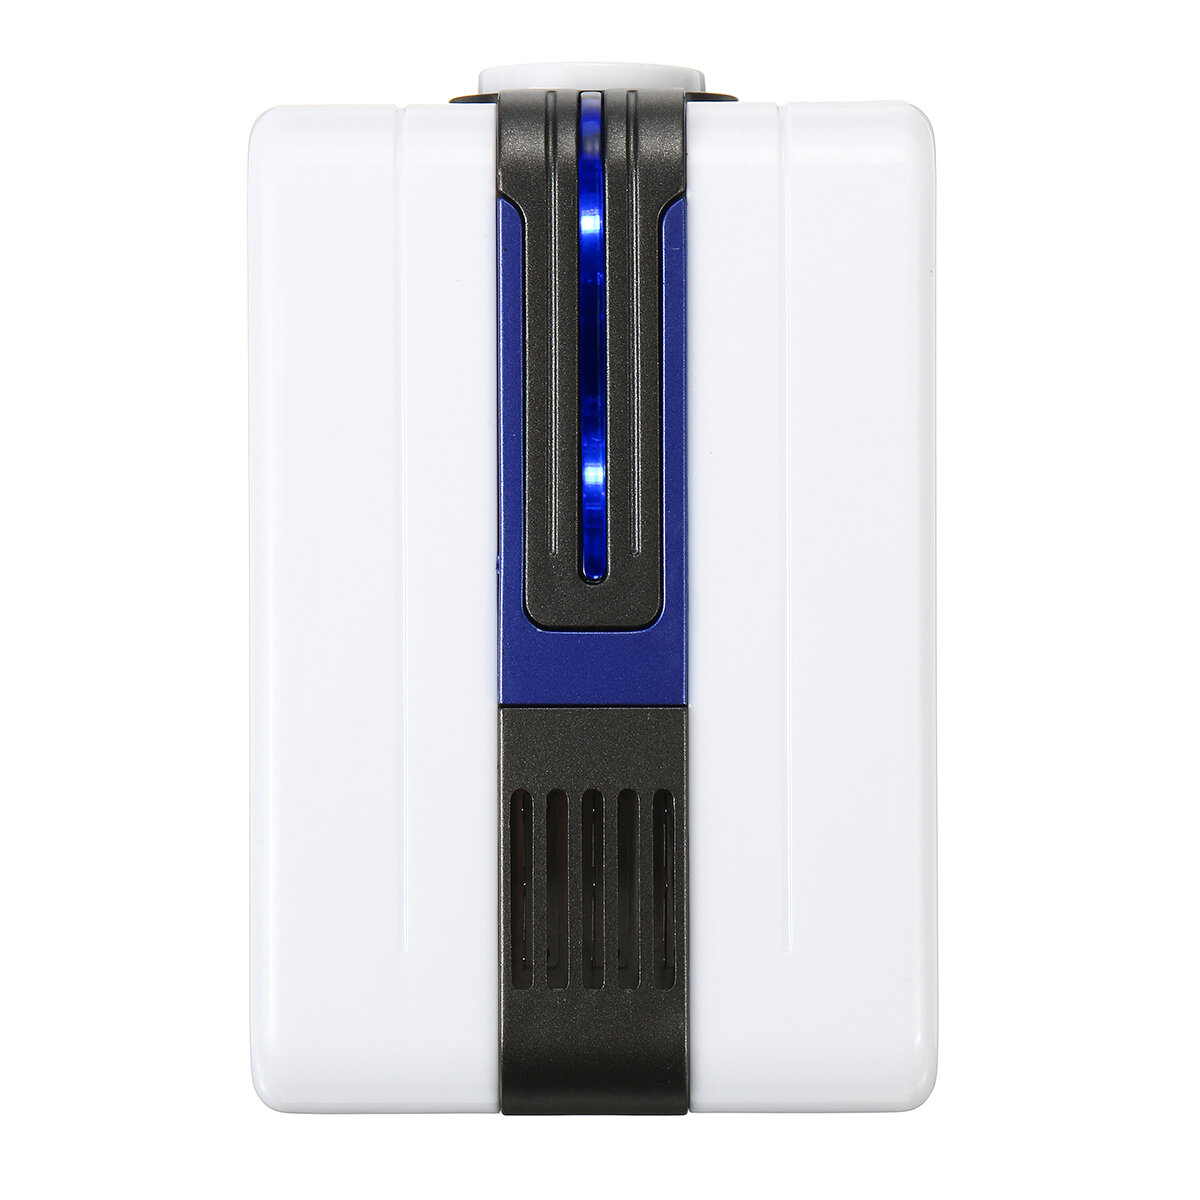 New Electronic Portable Negative Ion Air Purifier Purify Air Kill Bacteria for Home Office